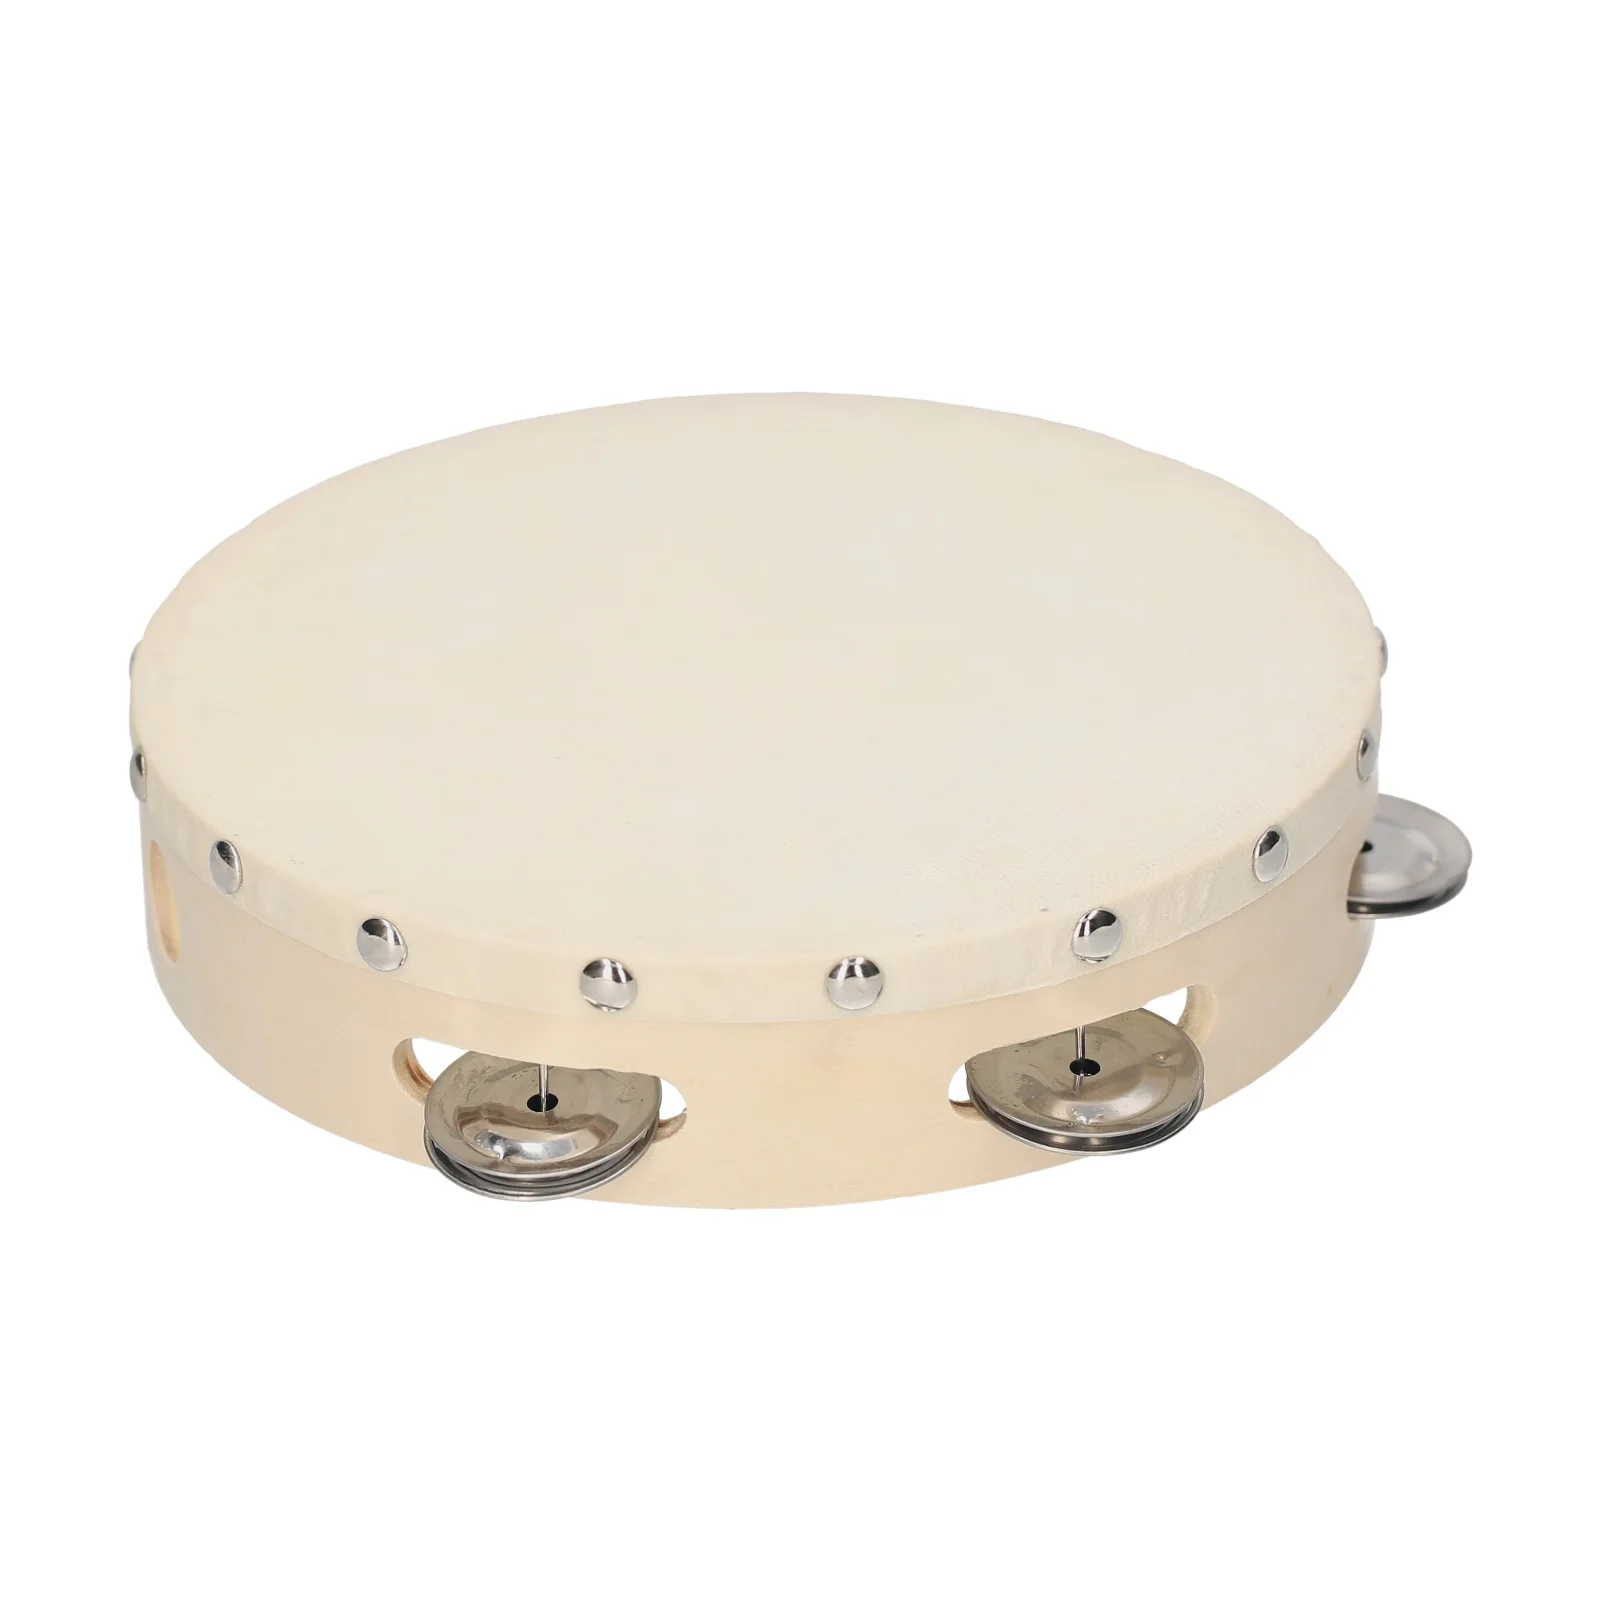 4/6/8 Inch Hand Tambourine with Single Row Jingles Sheepskin Drum Skin Wooden Tambourines Entertainment Musical Timbrel for Kids